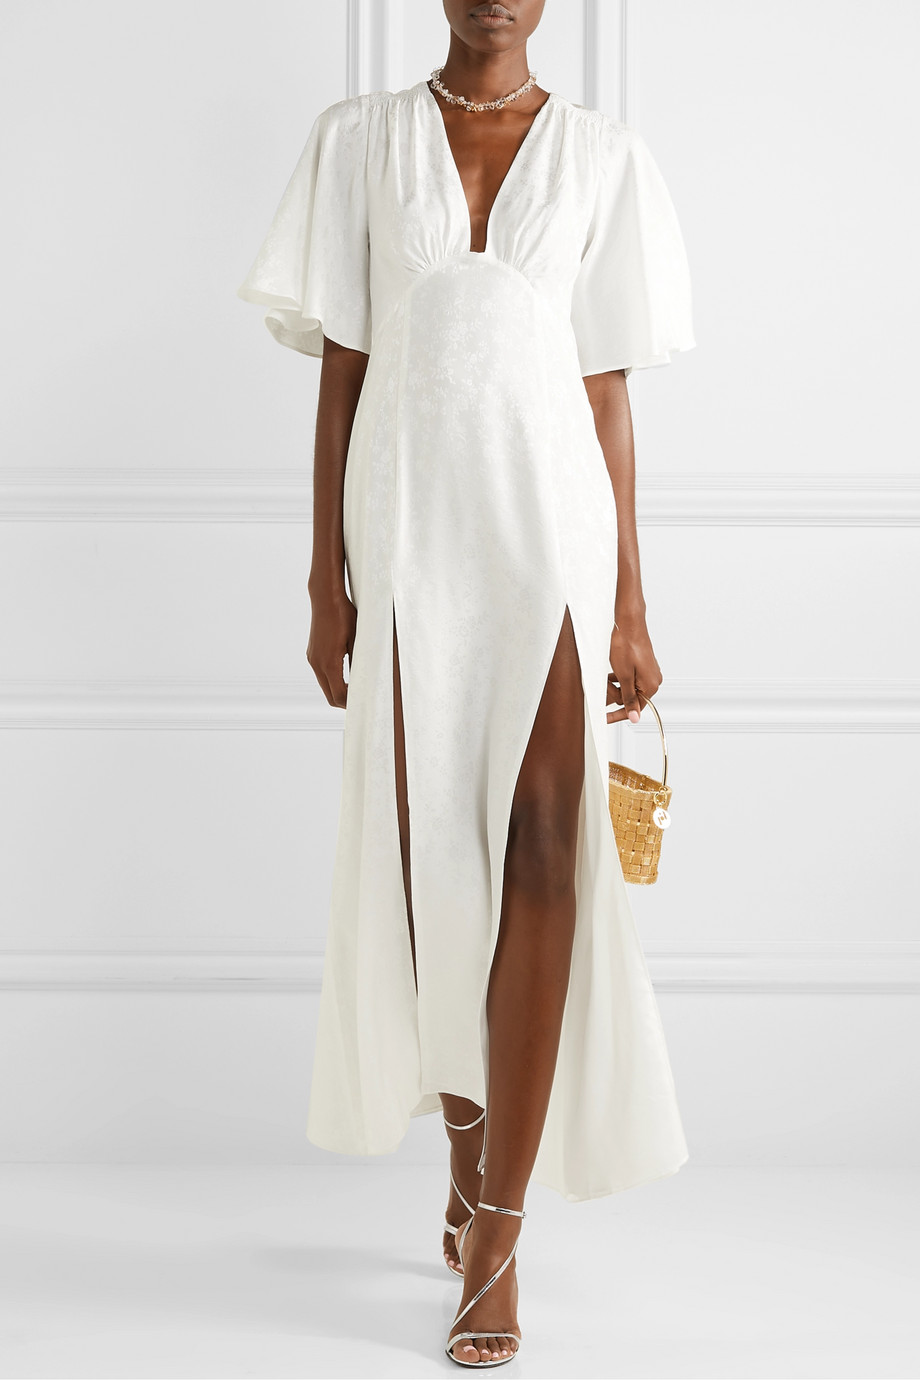 Silk Jacquard Gown by Les Reveries at Net-A-Porter